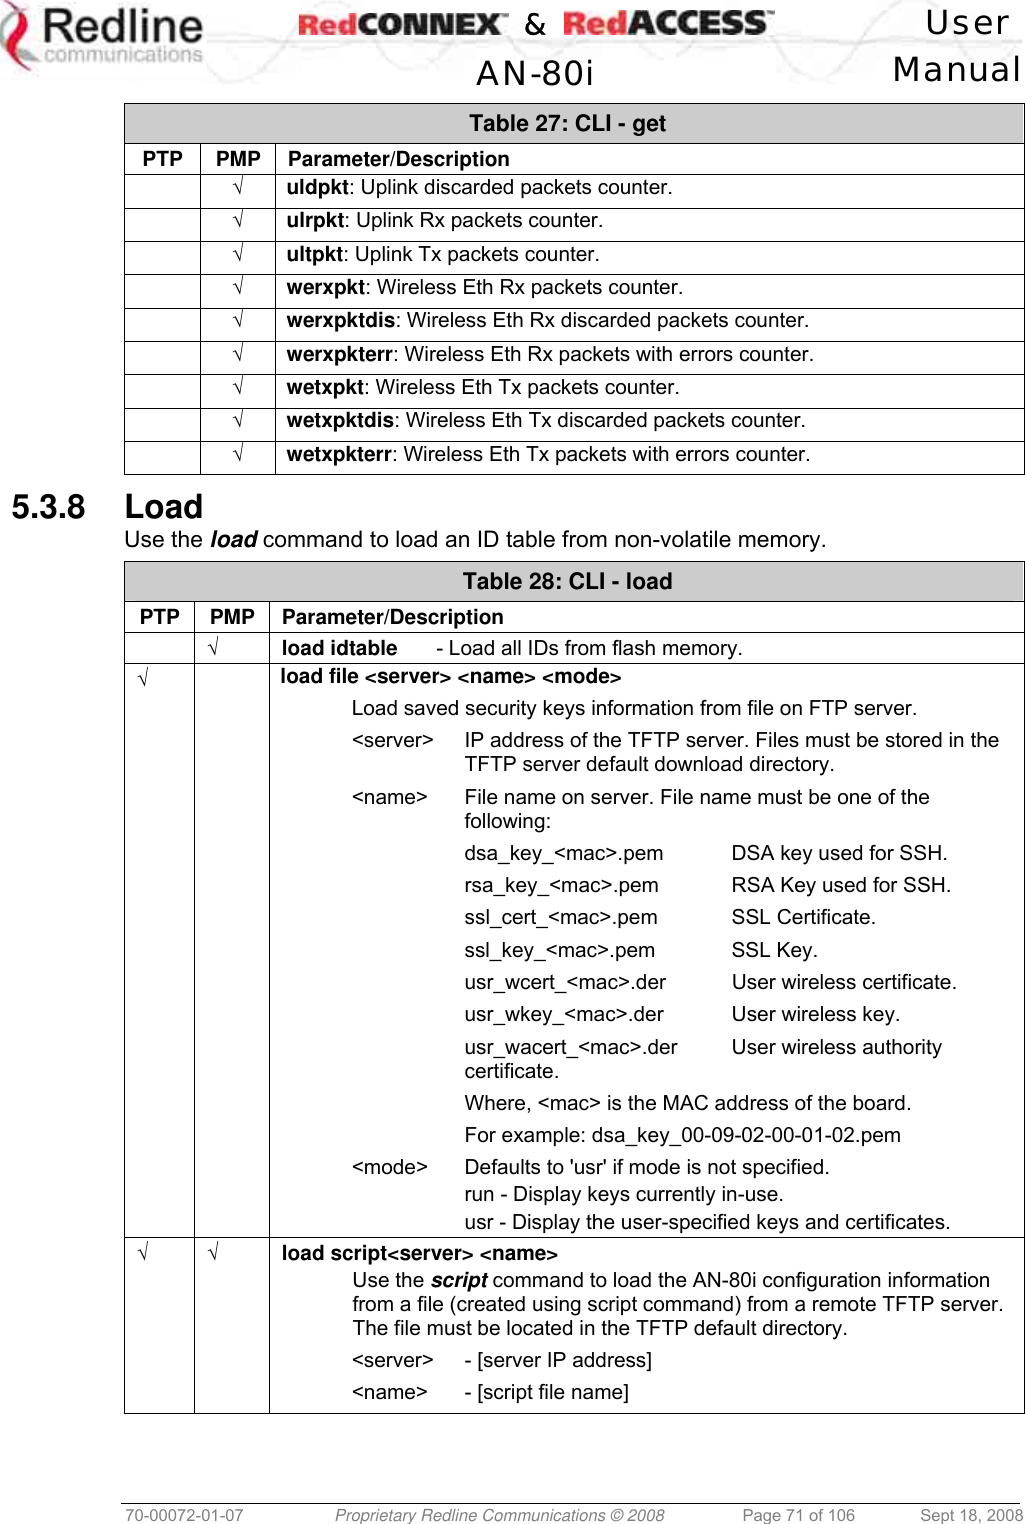    &amp;  User  AN-80i Manual  70-00072-01-07  Proprietary Redline Communications © 2008  Page 71 of 106  Sept 18, 2008 Table 27: CLI - get PTP PMP Parameter/Description  √ uldpkt: Uplink discarded packets counter.  √ ulrpkt: Uplink Rx packets counter.  √ ultpkt: Uplink Tx packets counter.  √ werxpkt: Wireless Eth Rx packets counter.  √ werxpktdis: Wireless Eth Rx discarded packets counter.  √ werxpkterr: Wireless Eth Rx packets with errors counter.  √ wetxpkt: Wireless Eth Tx packets counter.  √ wetxpktdis: Wireless Eth Tx discarded packets counter.  √ wetxpkterr: Wireless Eth Tx packets with errors counter. 5.3.8 Load Use the load command to load an ID table from non-volatile memory. Table 28: CLI - load PTP PMP Parameter/Description  √ load idtable   - Load all IDs from flash memory. √   load file &lt;server&gt; &lt;name&gt; &lt;mode&gt; Load saved security keys information from file on FTP server. &lt;server&gt;  IP address of the TFTP server. Files must be stored in the TFTP server default download directory. &lt;name&gt;  File name on server. File name must be one of the following: dsa_key_&lt;mac&gt;.pem  DSA key used for SSH. rsa_key_&lt;mac&gt;.pem RSA Key used for SSH. ssl_cert_&lt;mac&gt;.pem SSL Certificate. ssl_key_&lt;mac&gt;.pem SSL Key. usr_wcert_&lt;mac&gt;.der  User wireless certificate. usr_wkey_&lt;mac&gt;.der  User wireless key. usr_wacert_&lt;mac&gt;.der  User wireless authority certificate. Where, &lt;mac&gt; is the MAC address of the board. For example: dsa_key_00-09-02-00-01-02.pem &lt;mode&gt;  Defaults to &apos;usr&apos; if mode is not specified.   run - Display keys currently in-use.   usr - Display the user-specified keys and certificates. √ √ load script&lt;server&gt; &lt;name&gt; Use the script command to load the AN-80i configuration information from a file (created using script command) from a remote TFTP server. The file must be located in the TFTP default directory. &lt;server&gt;  - [server IP address] &lt;name&gt;  - [script file name]  